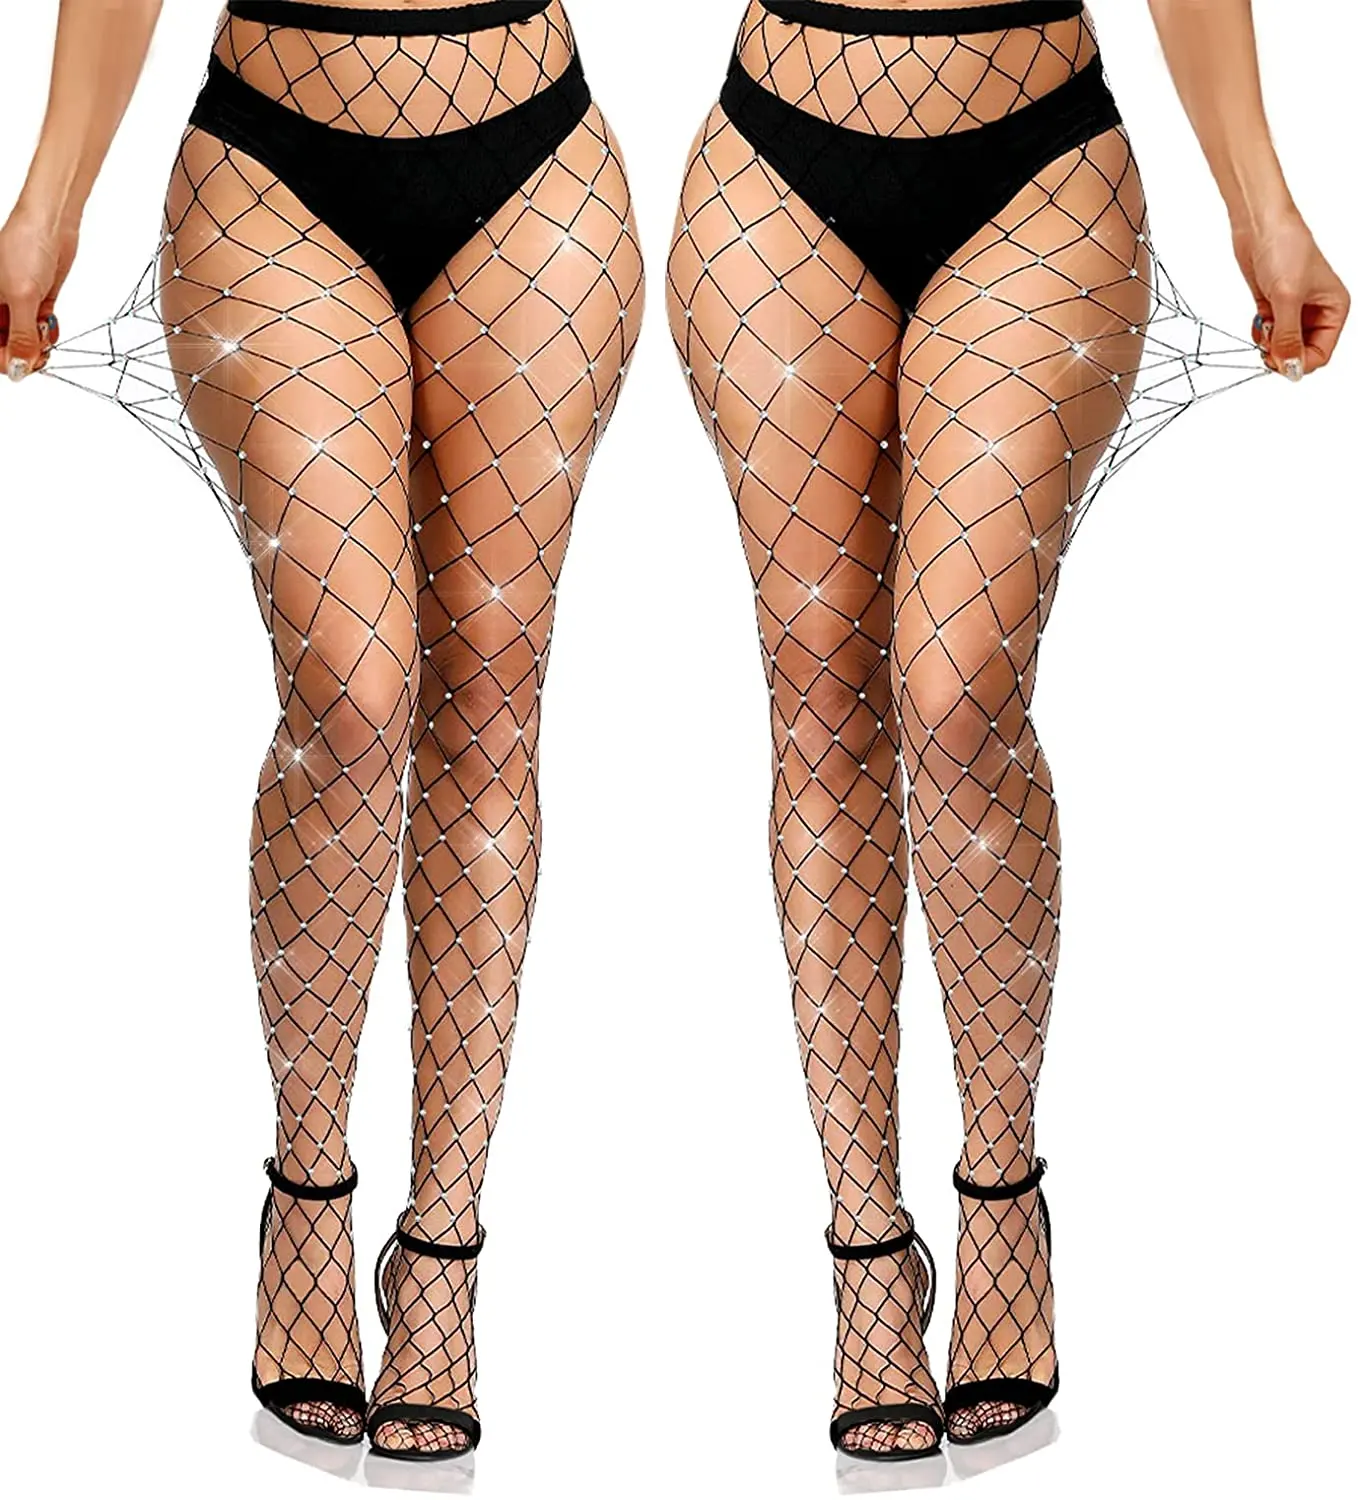 Multi Color Women Sexy Rhinestone Mesh Fishnets Pantyhose Hollow Out Pantyhose Tights